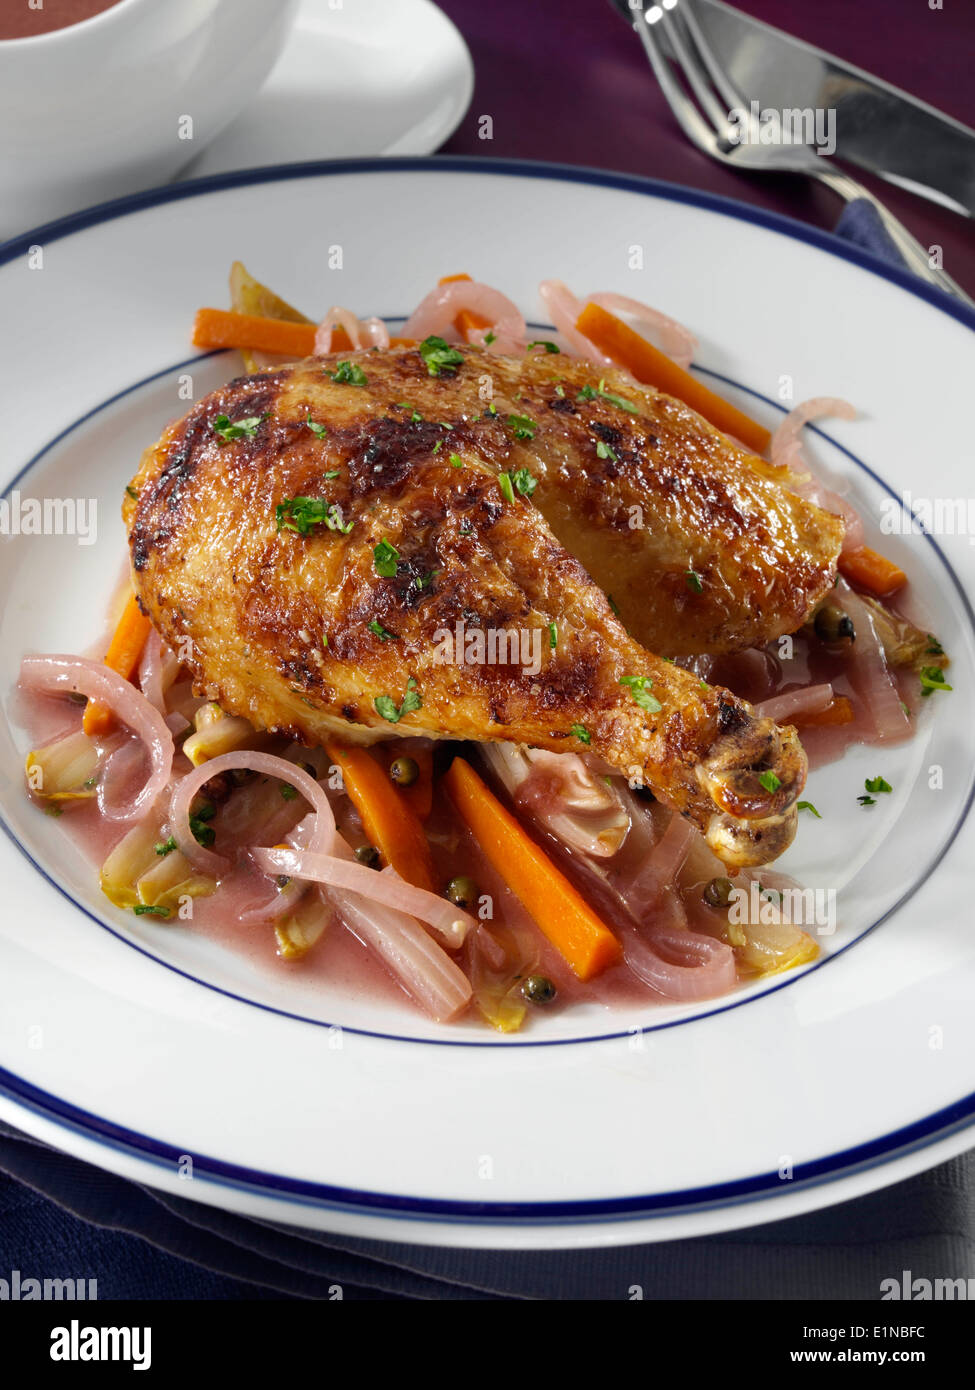 Port and green peppercorn crispy chicken main meal individual portion Stock Photo